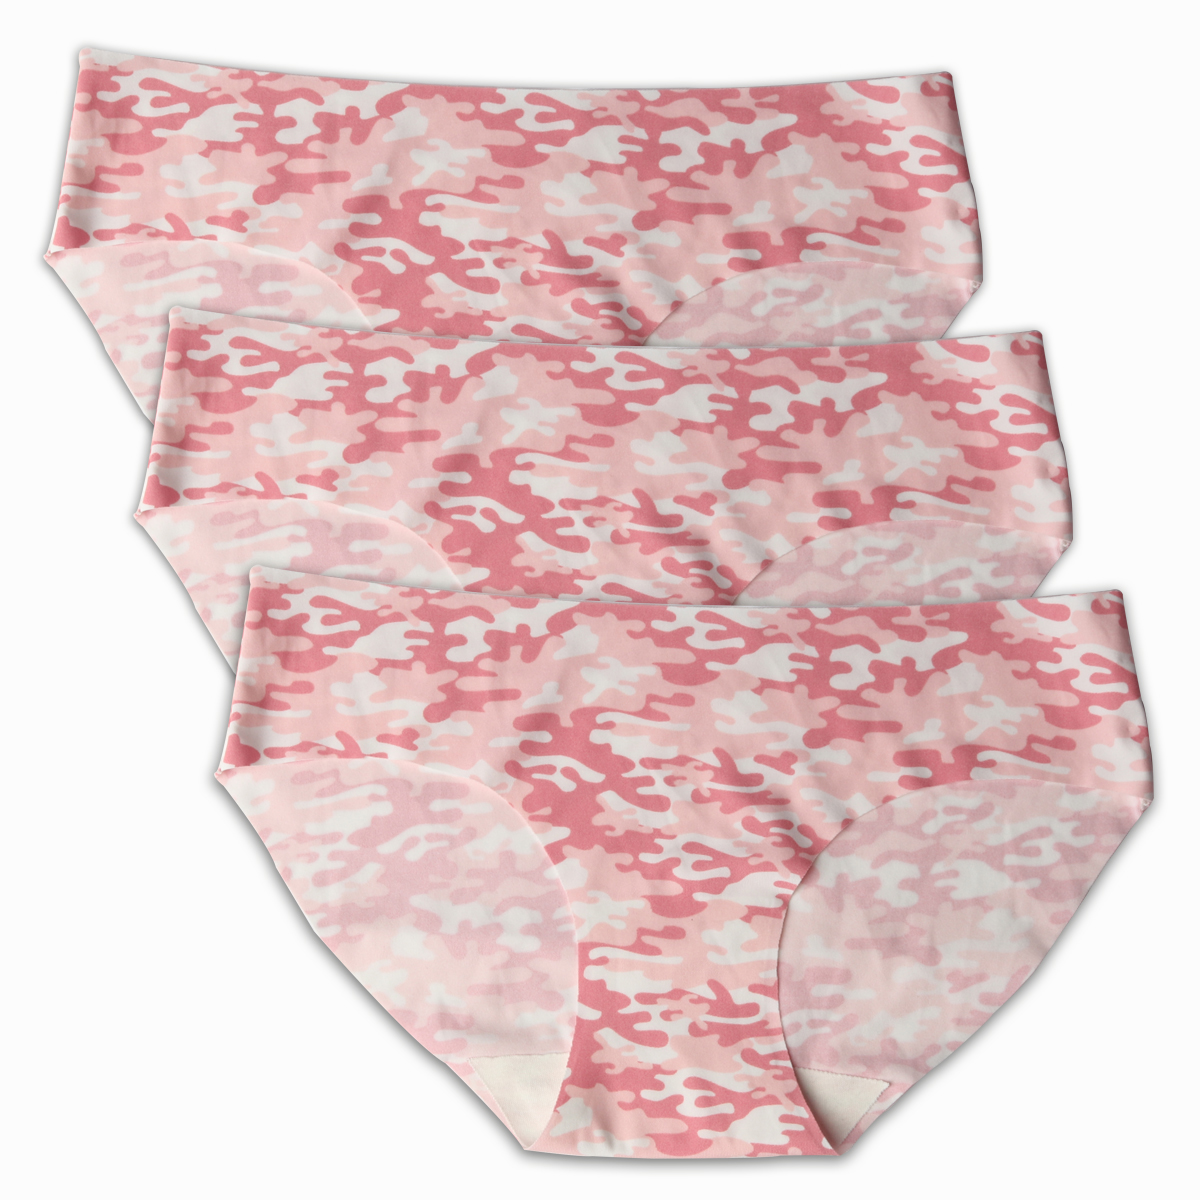 Briefs-My Private Pocket Backup Underwear for Girls - Camo 3 Pack